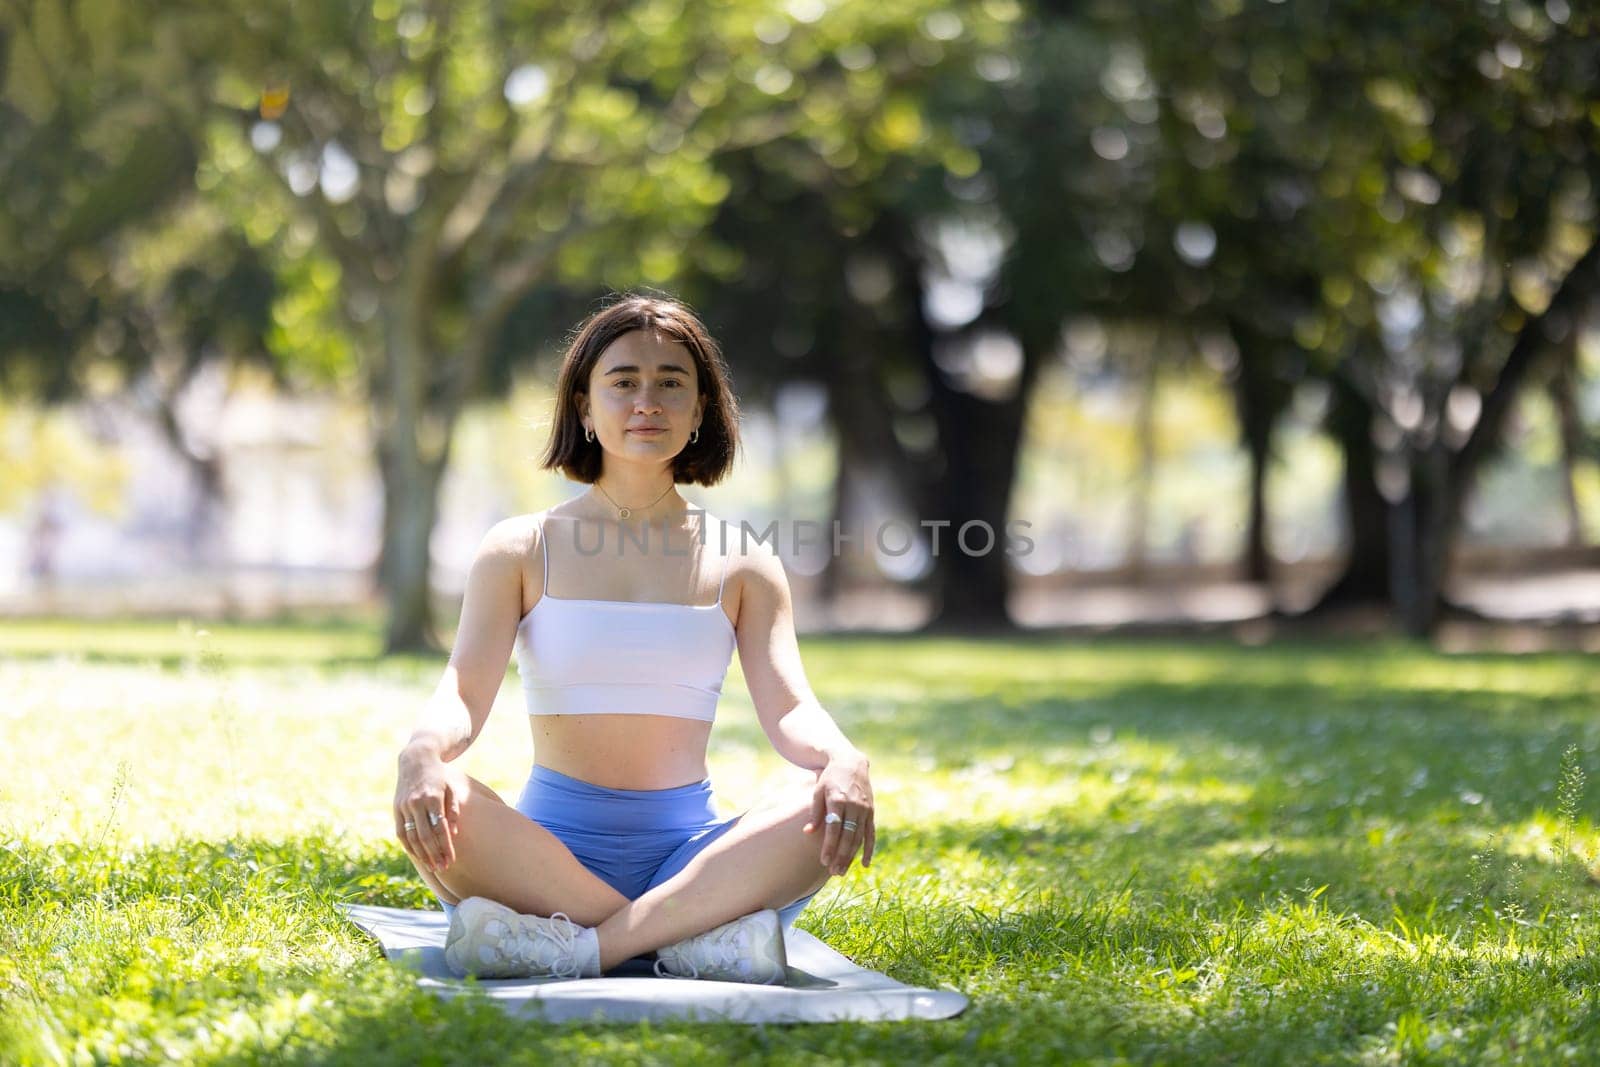 A woman is sitting on a mat in a park, looking up at the sky. She is in a peaceful and relaxed state